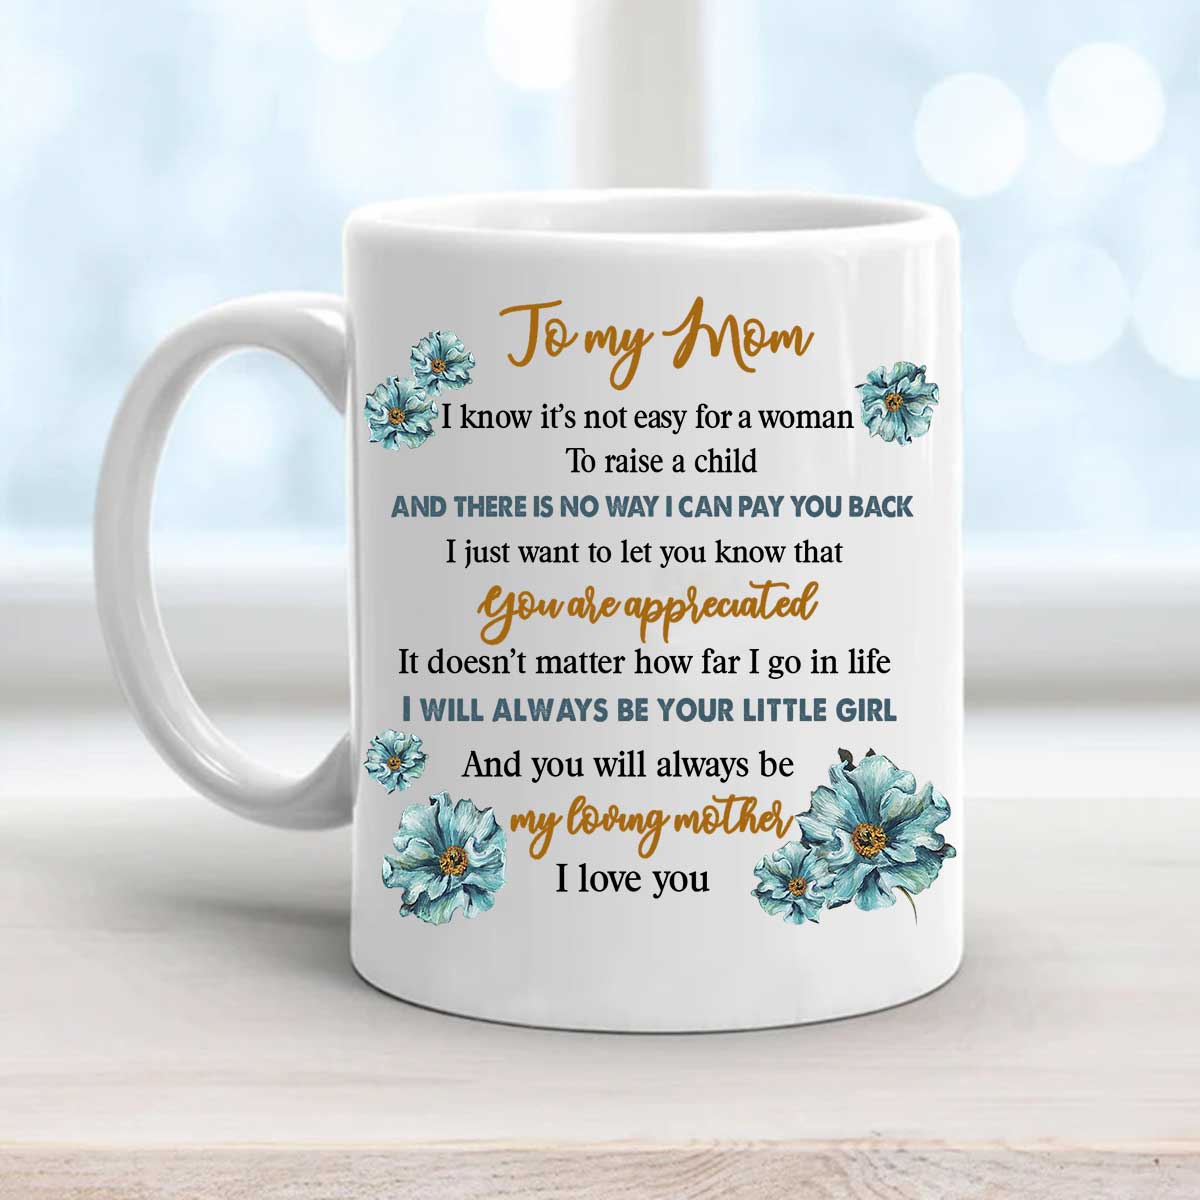 Gift For Mom Mug - Daughter to mom, Vintage wallpaper Mug- Gift For Mother's Day, Presents for Mom, Anniversary- I will always be your little girl Mug